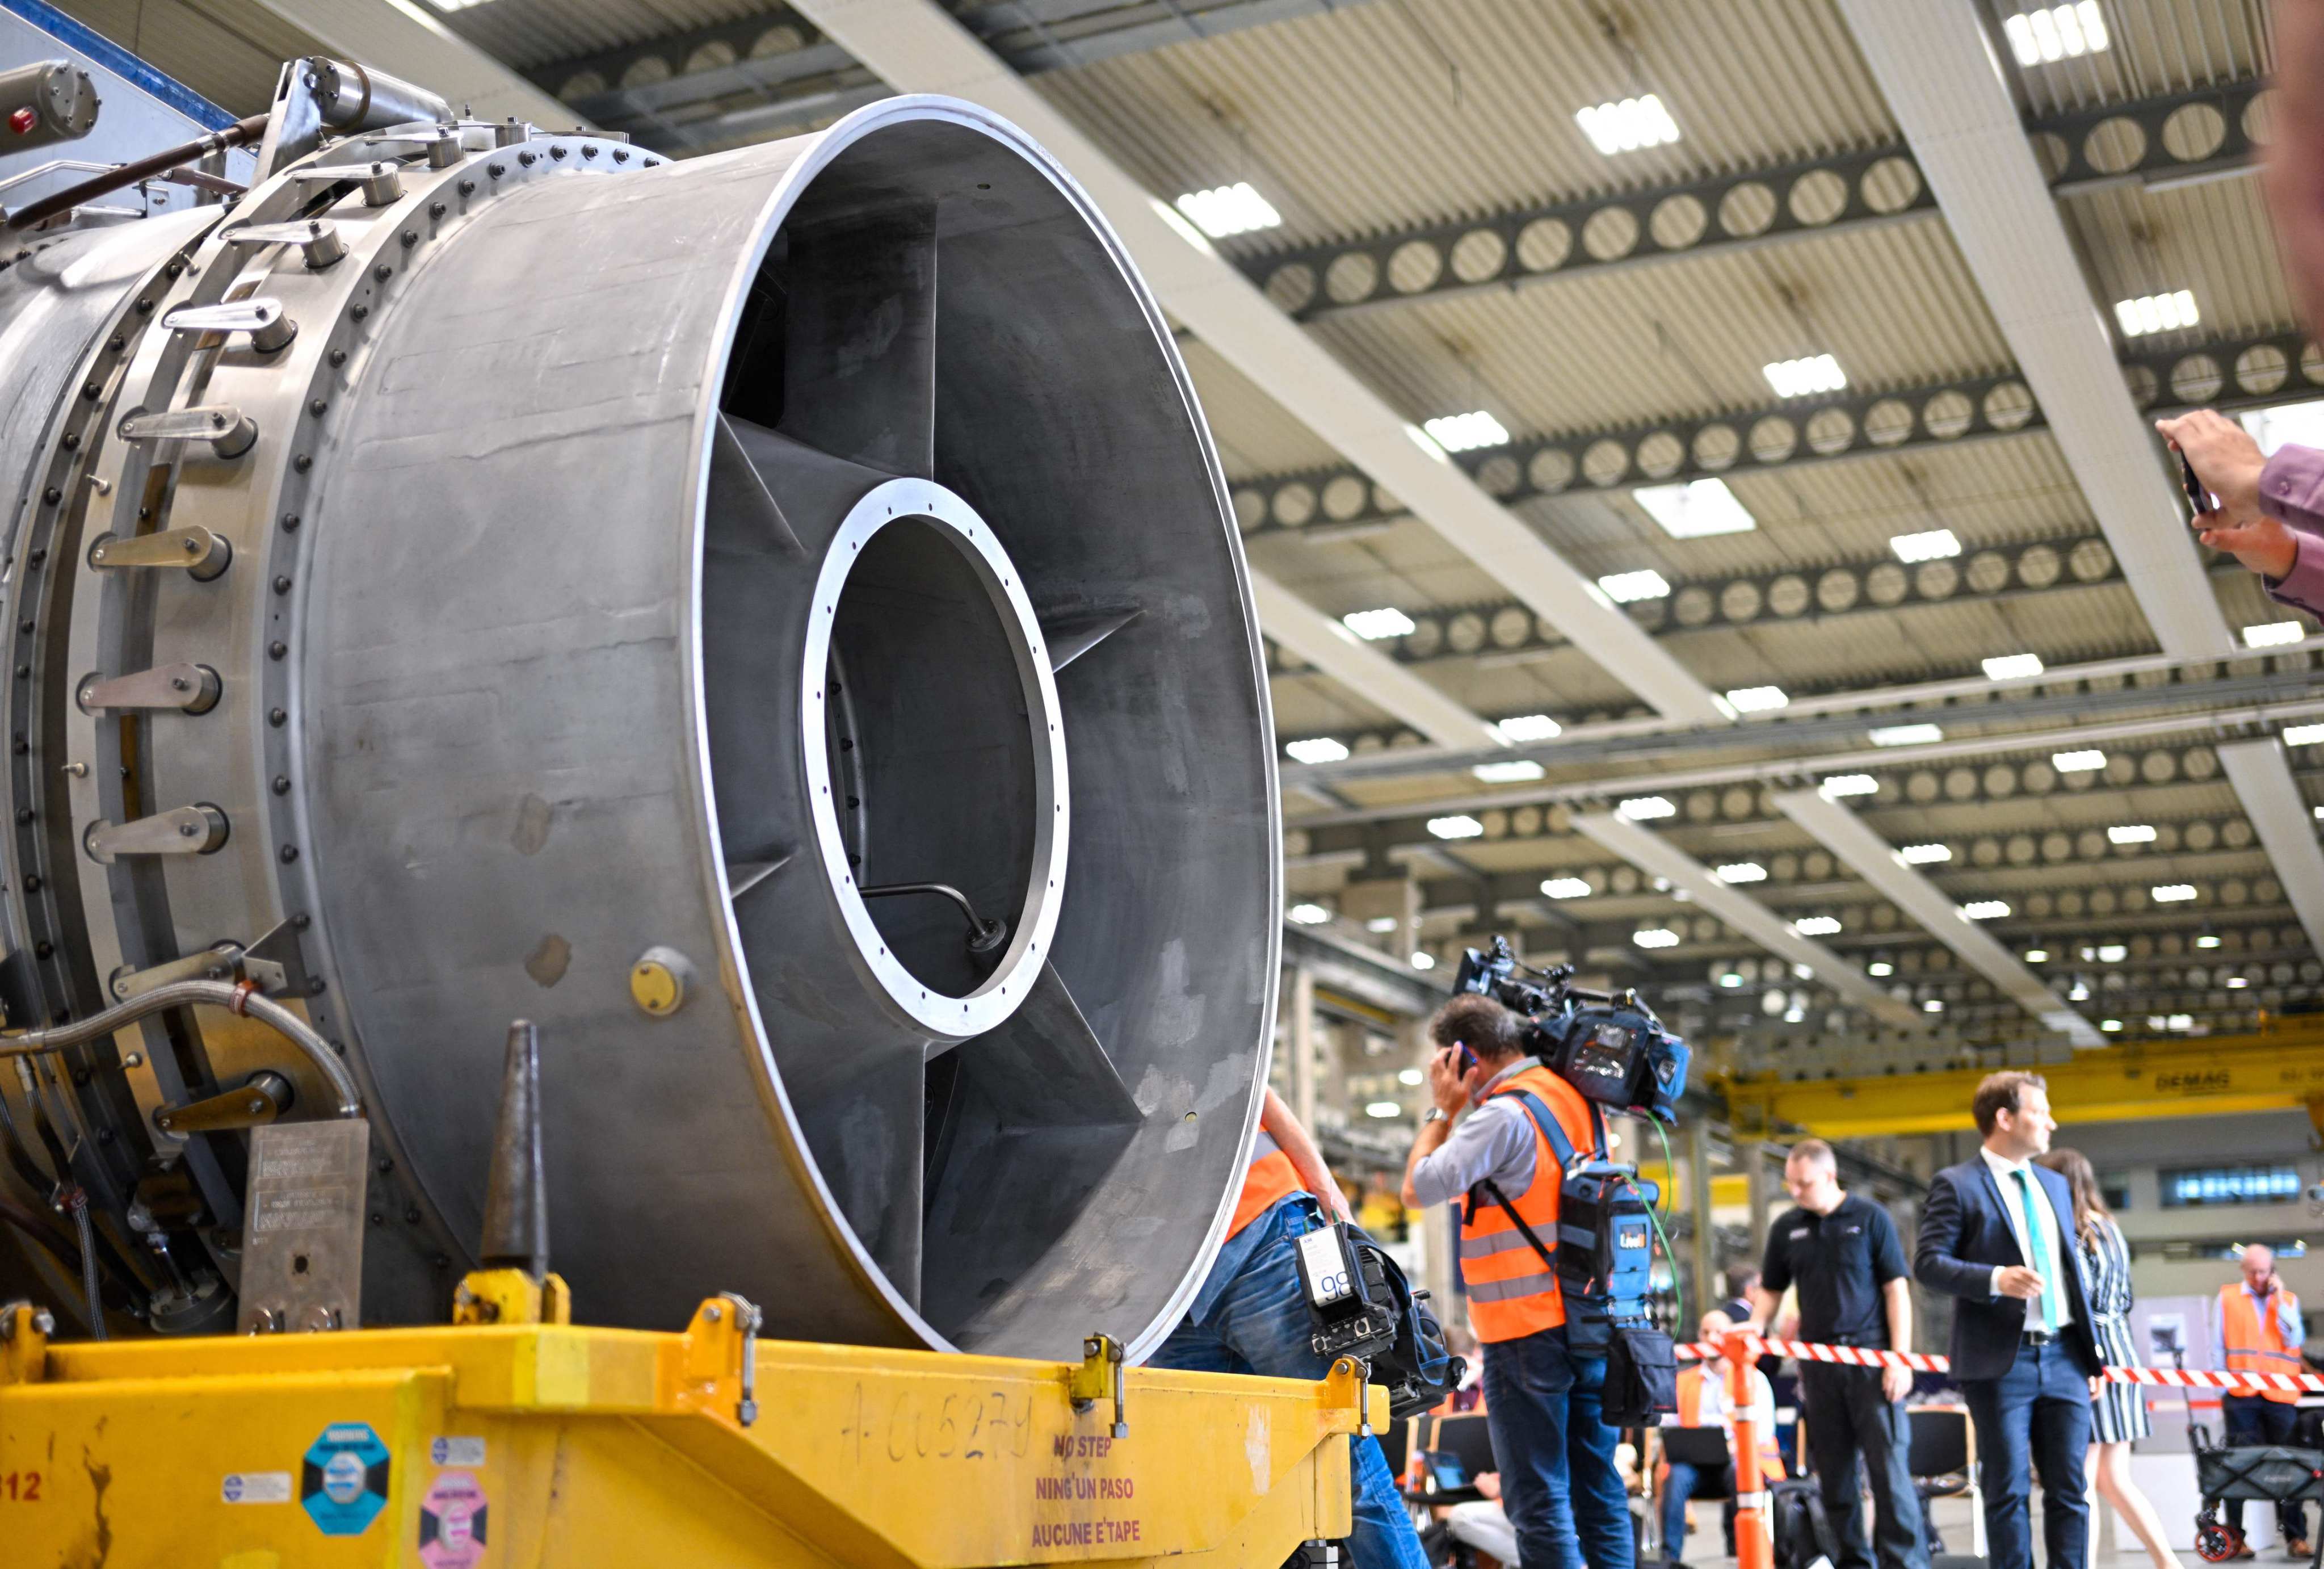 A turbine for the Nord Stream 1 pipeline is displayed at the plant of Siemens Energy in Muelheim an der Ruhr in western Germany on Wednesday. Photo: AFP